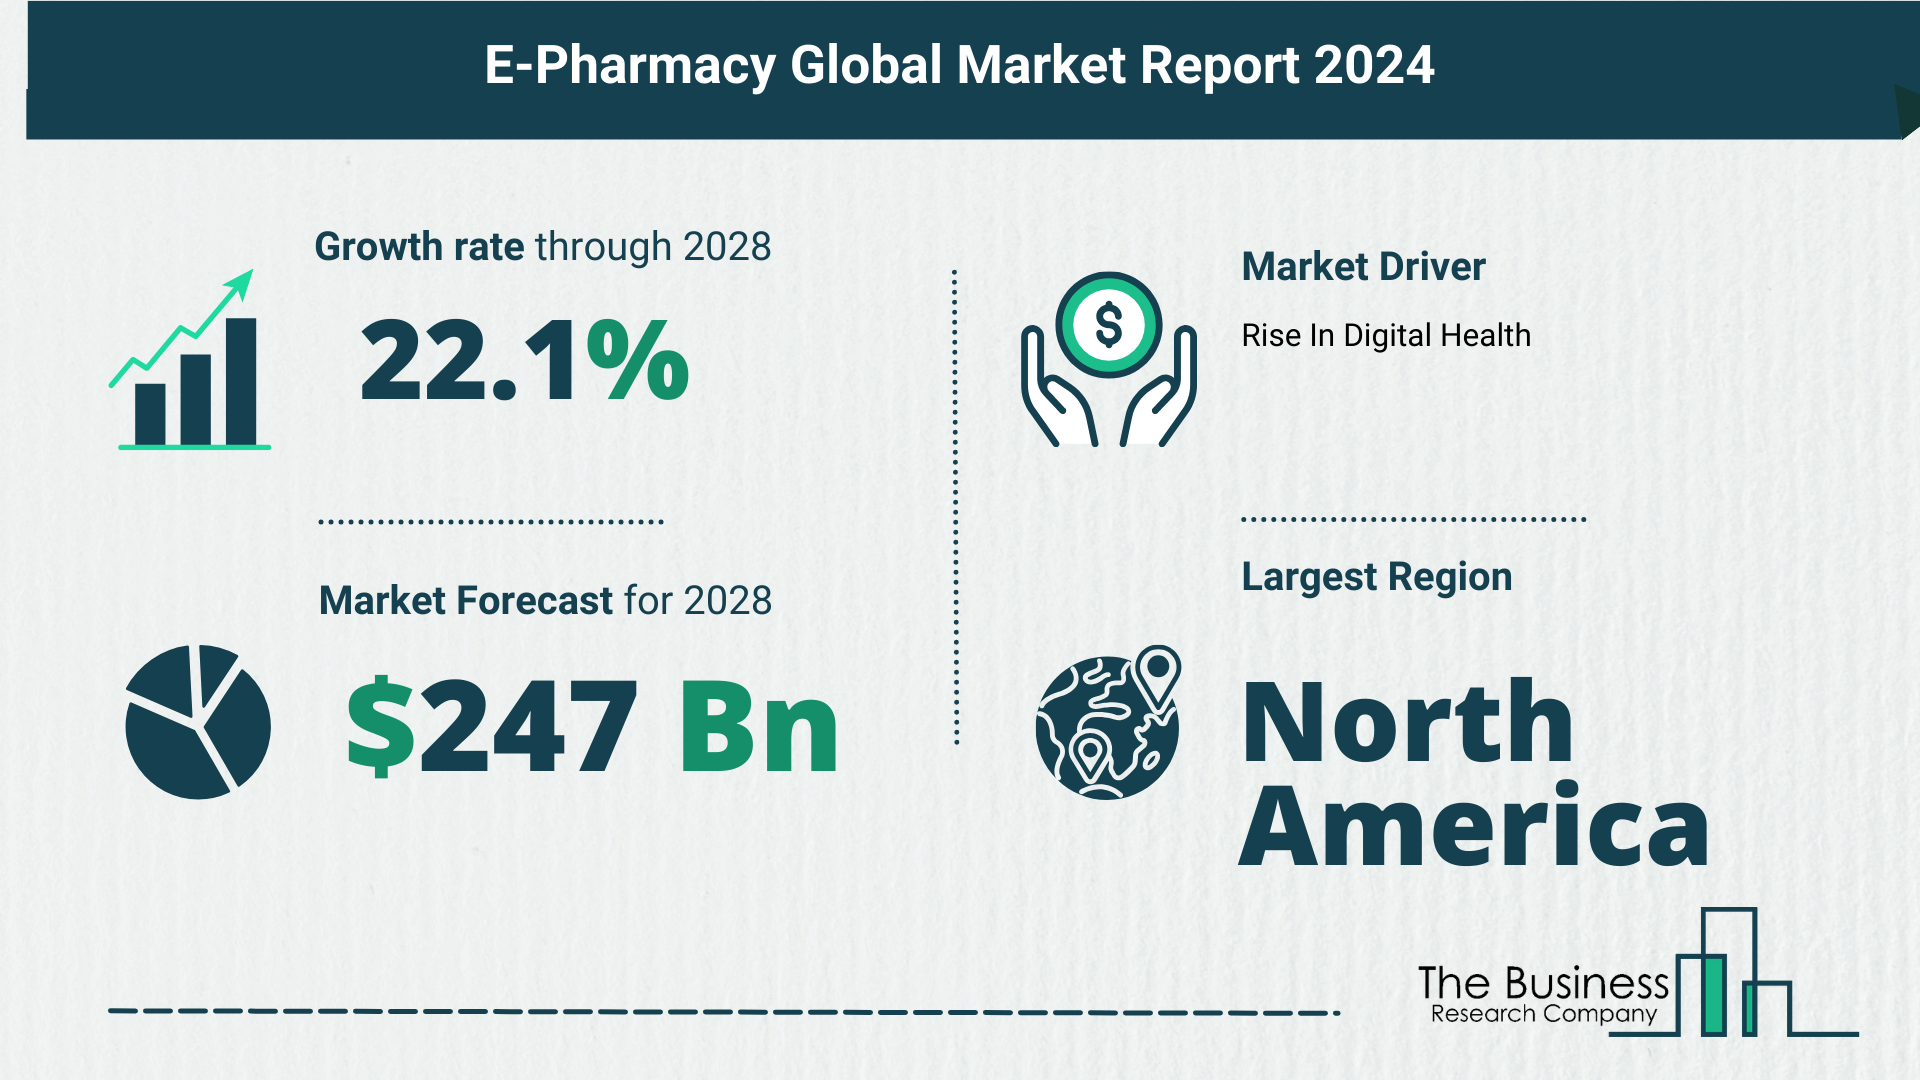 What Is The Forecast Growth Rate For The E-Pharmacy Market?